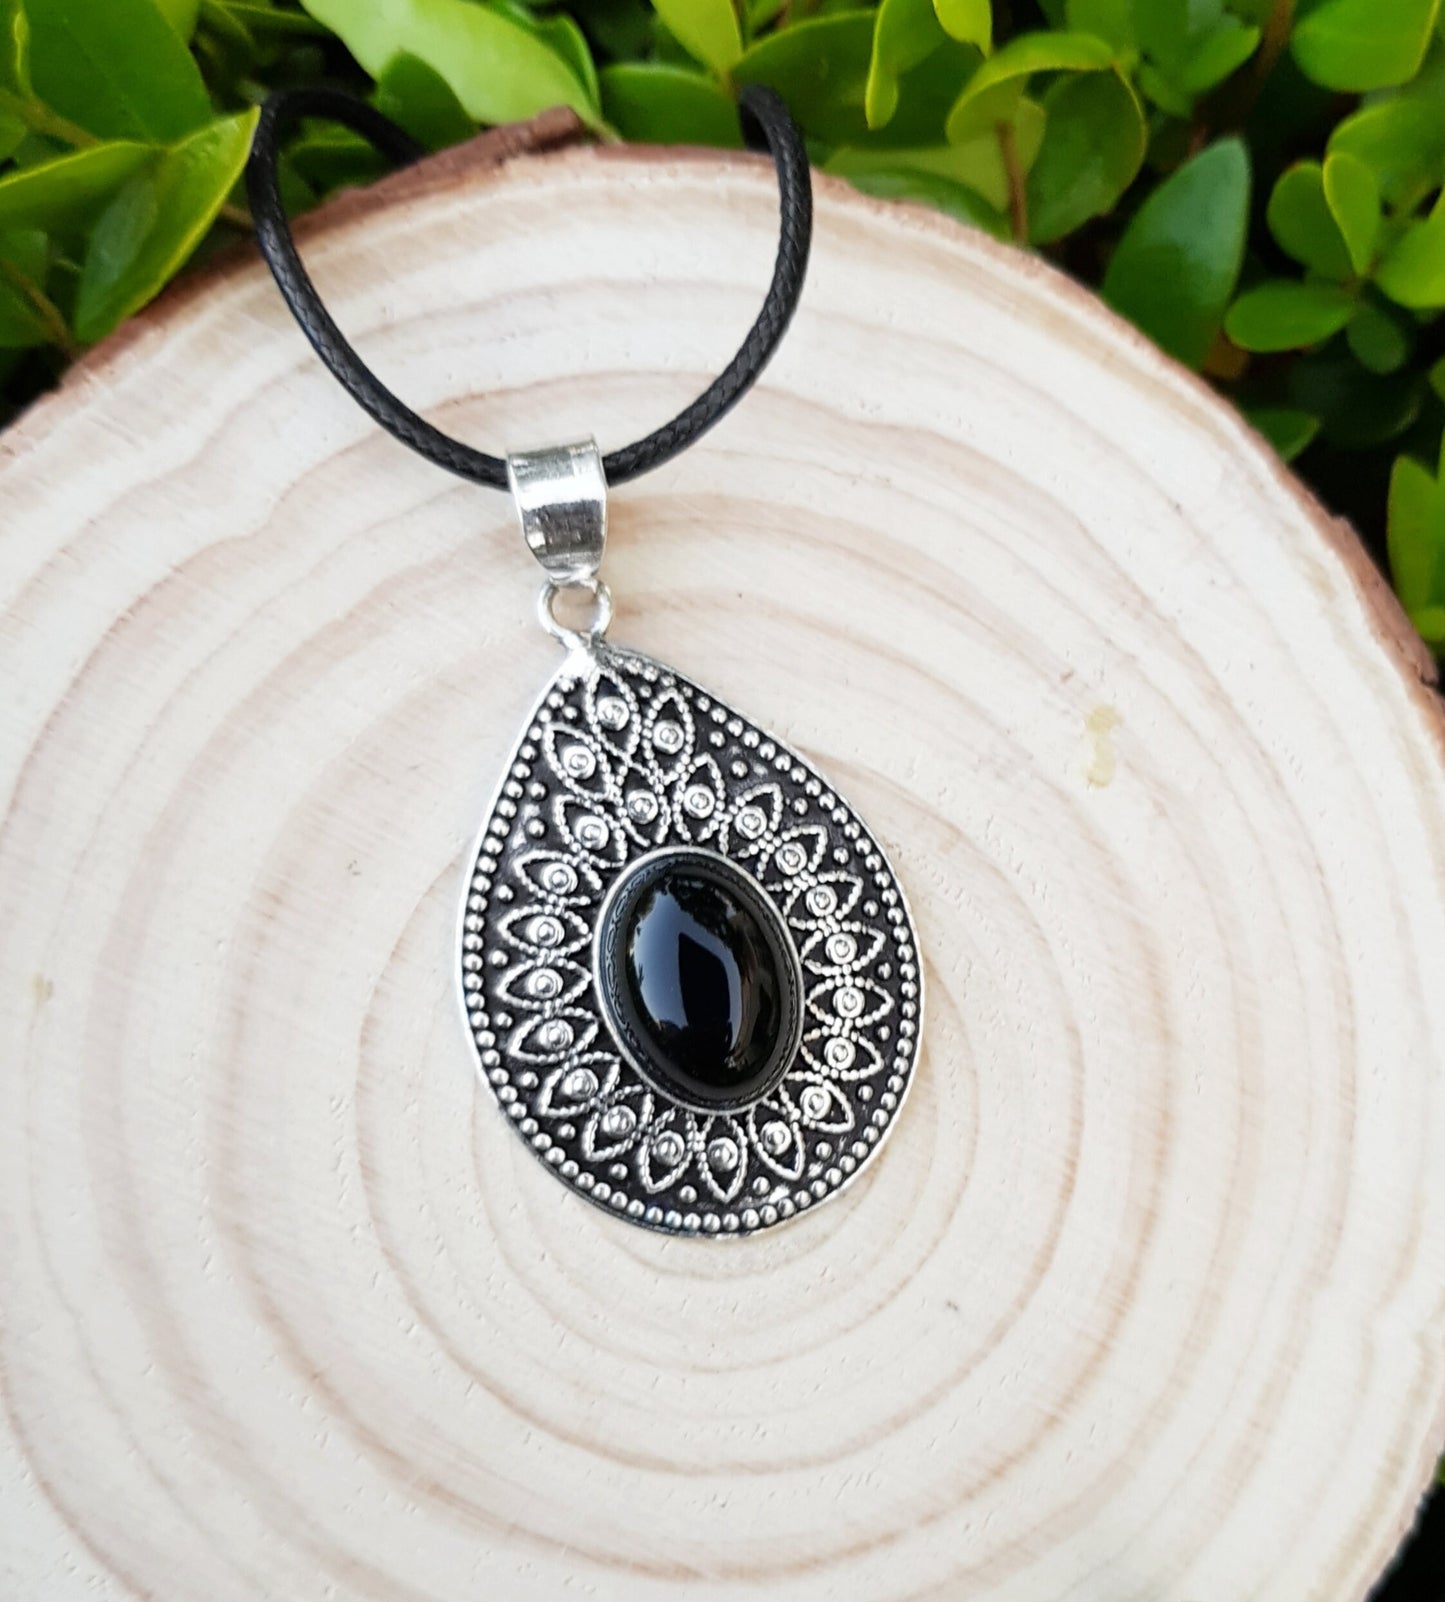 Black Onyx Ethnic Pendant In Sterling Silver Big Teardrop Pendant Boho Crystal Necklace Unique Gift For Women